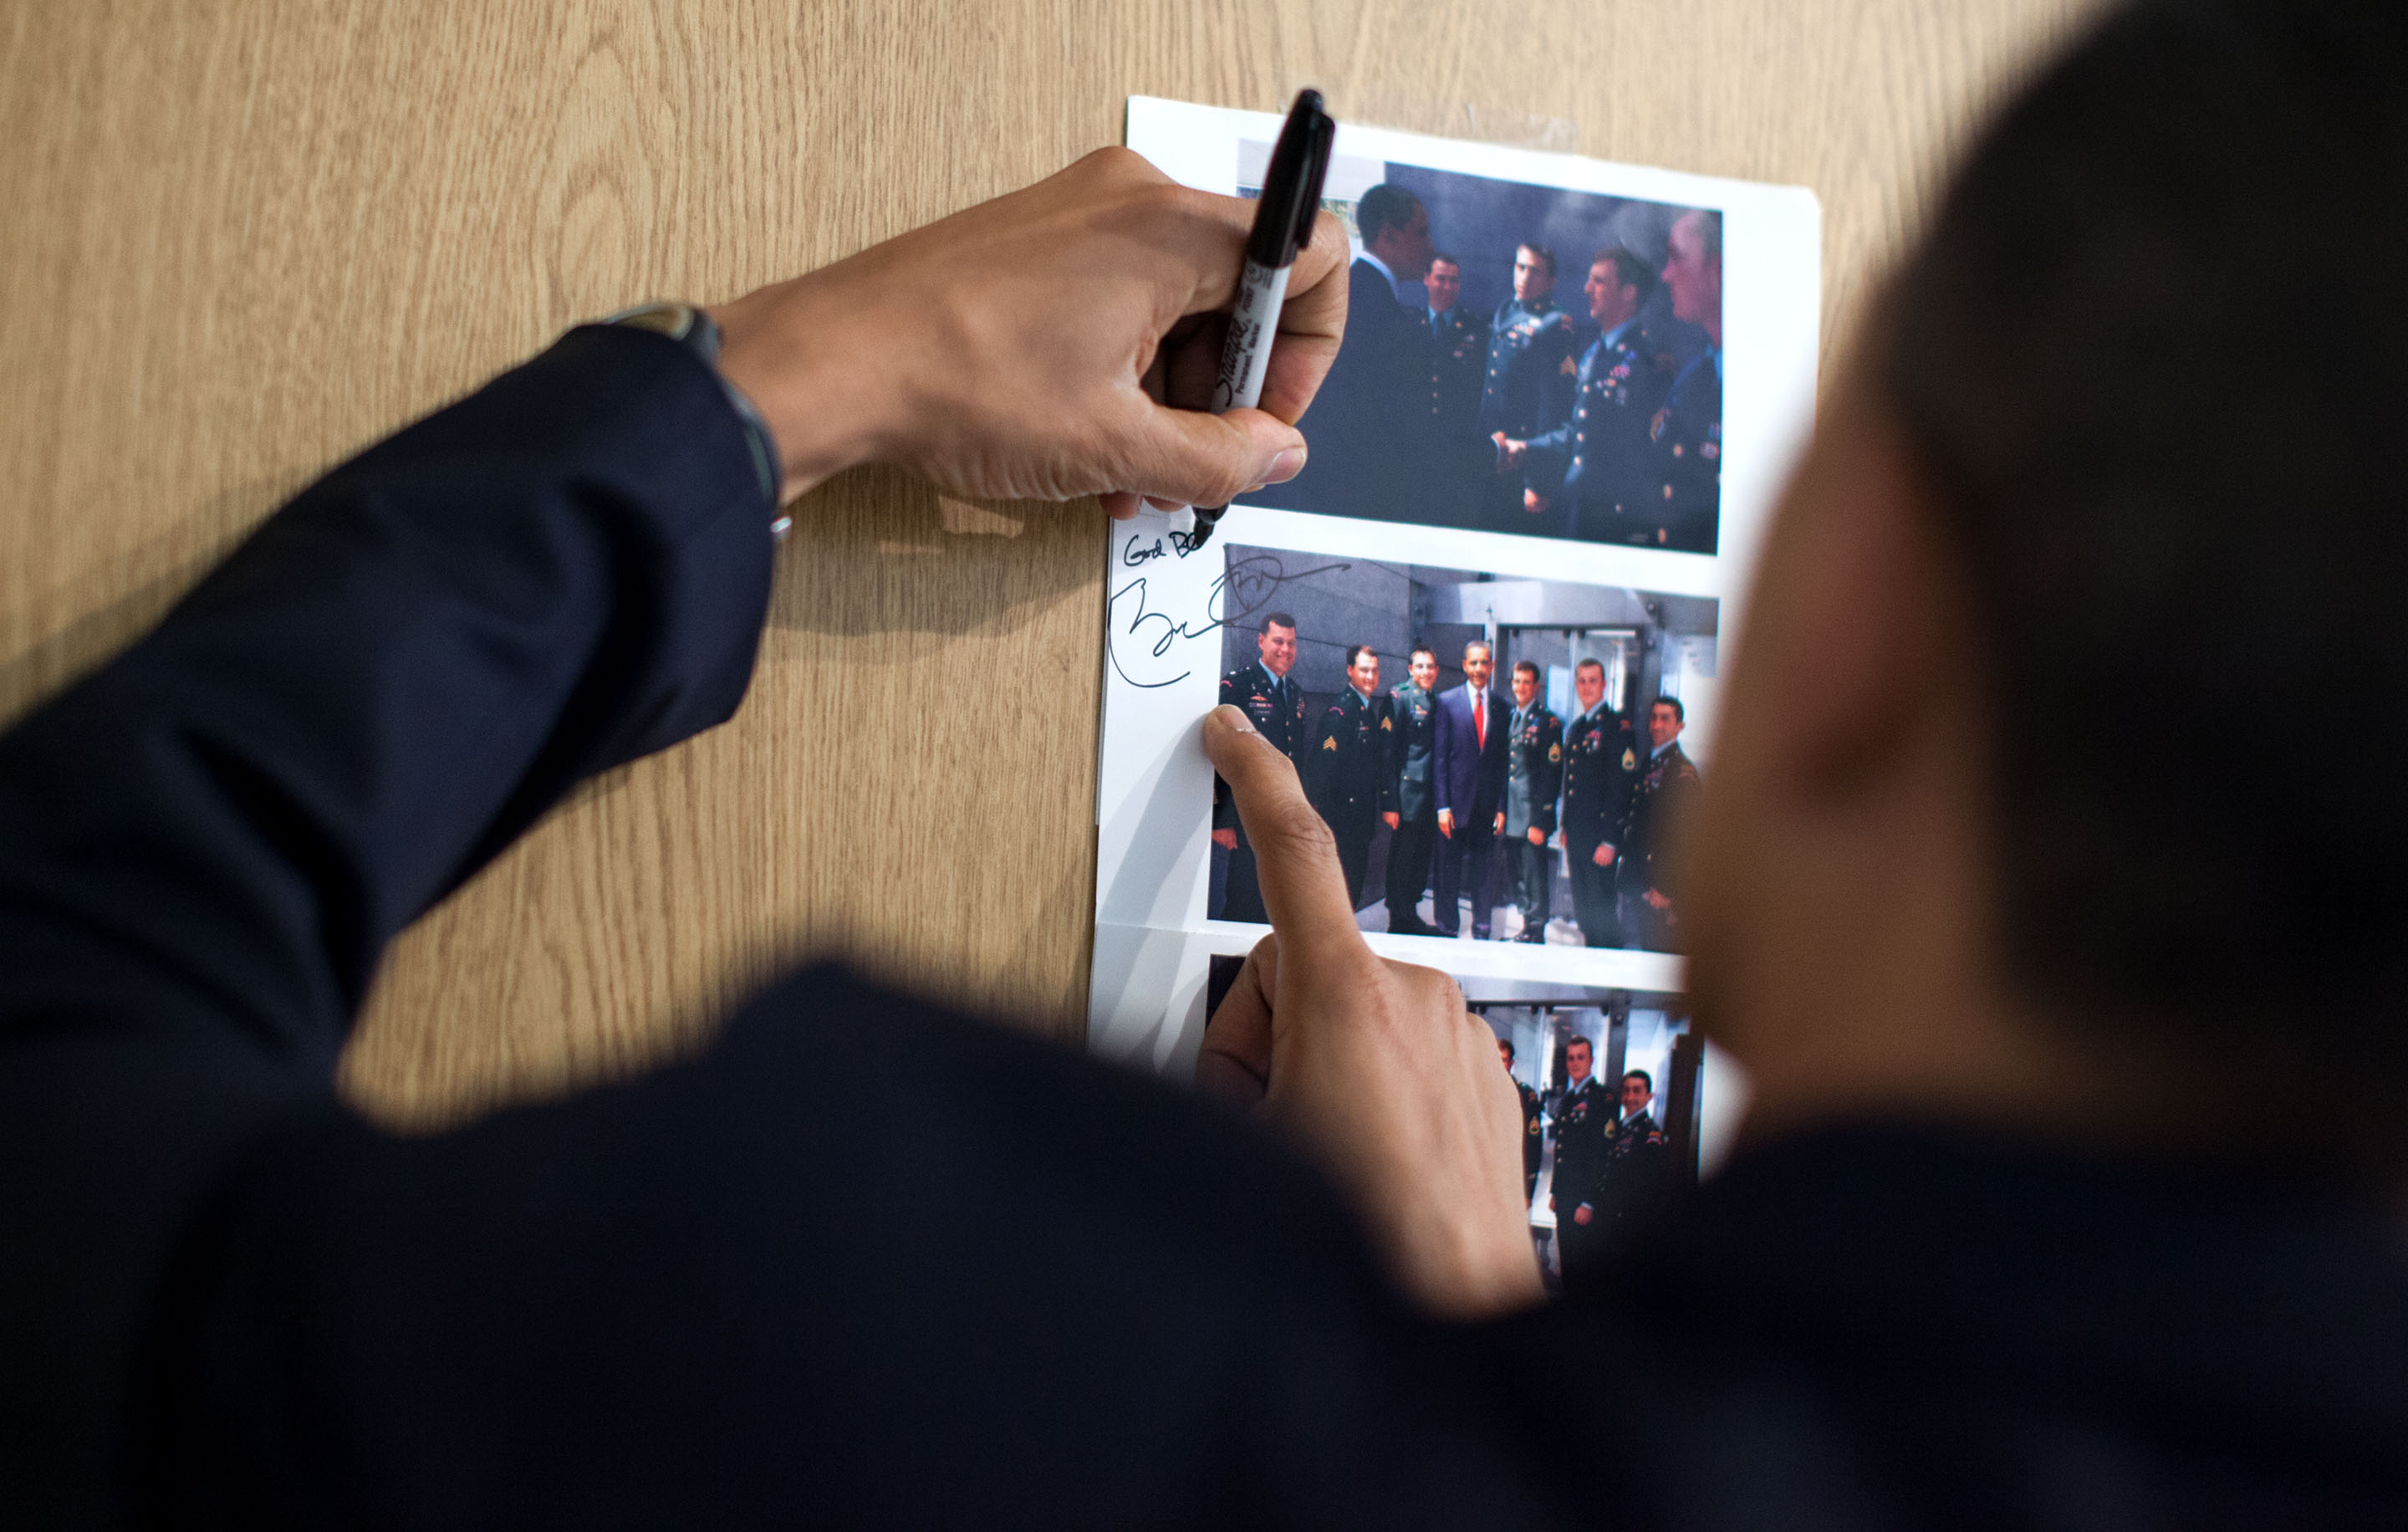 Feb. 28, 2010: The President signs a photo for Cory from their Normandy greeting. (Official White House Photo by Pete Souza)